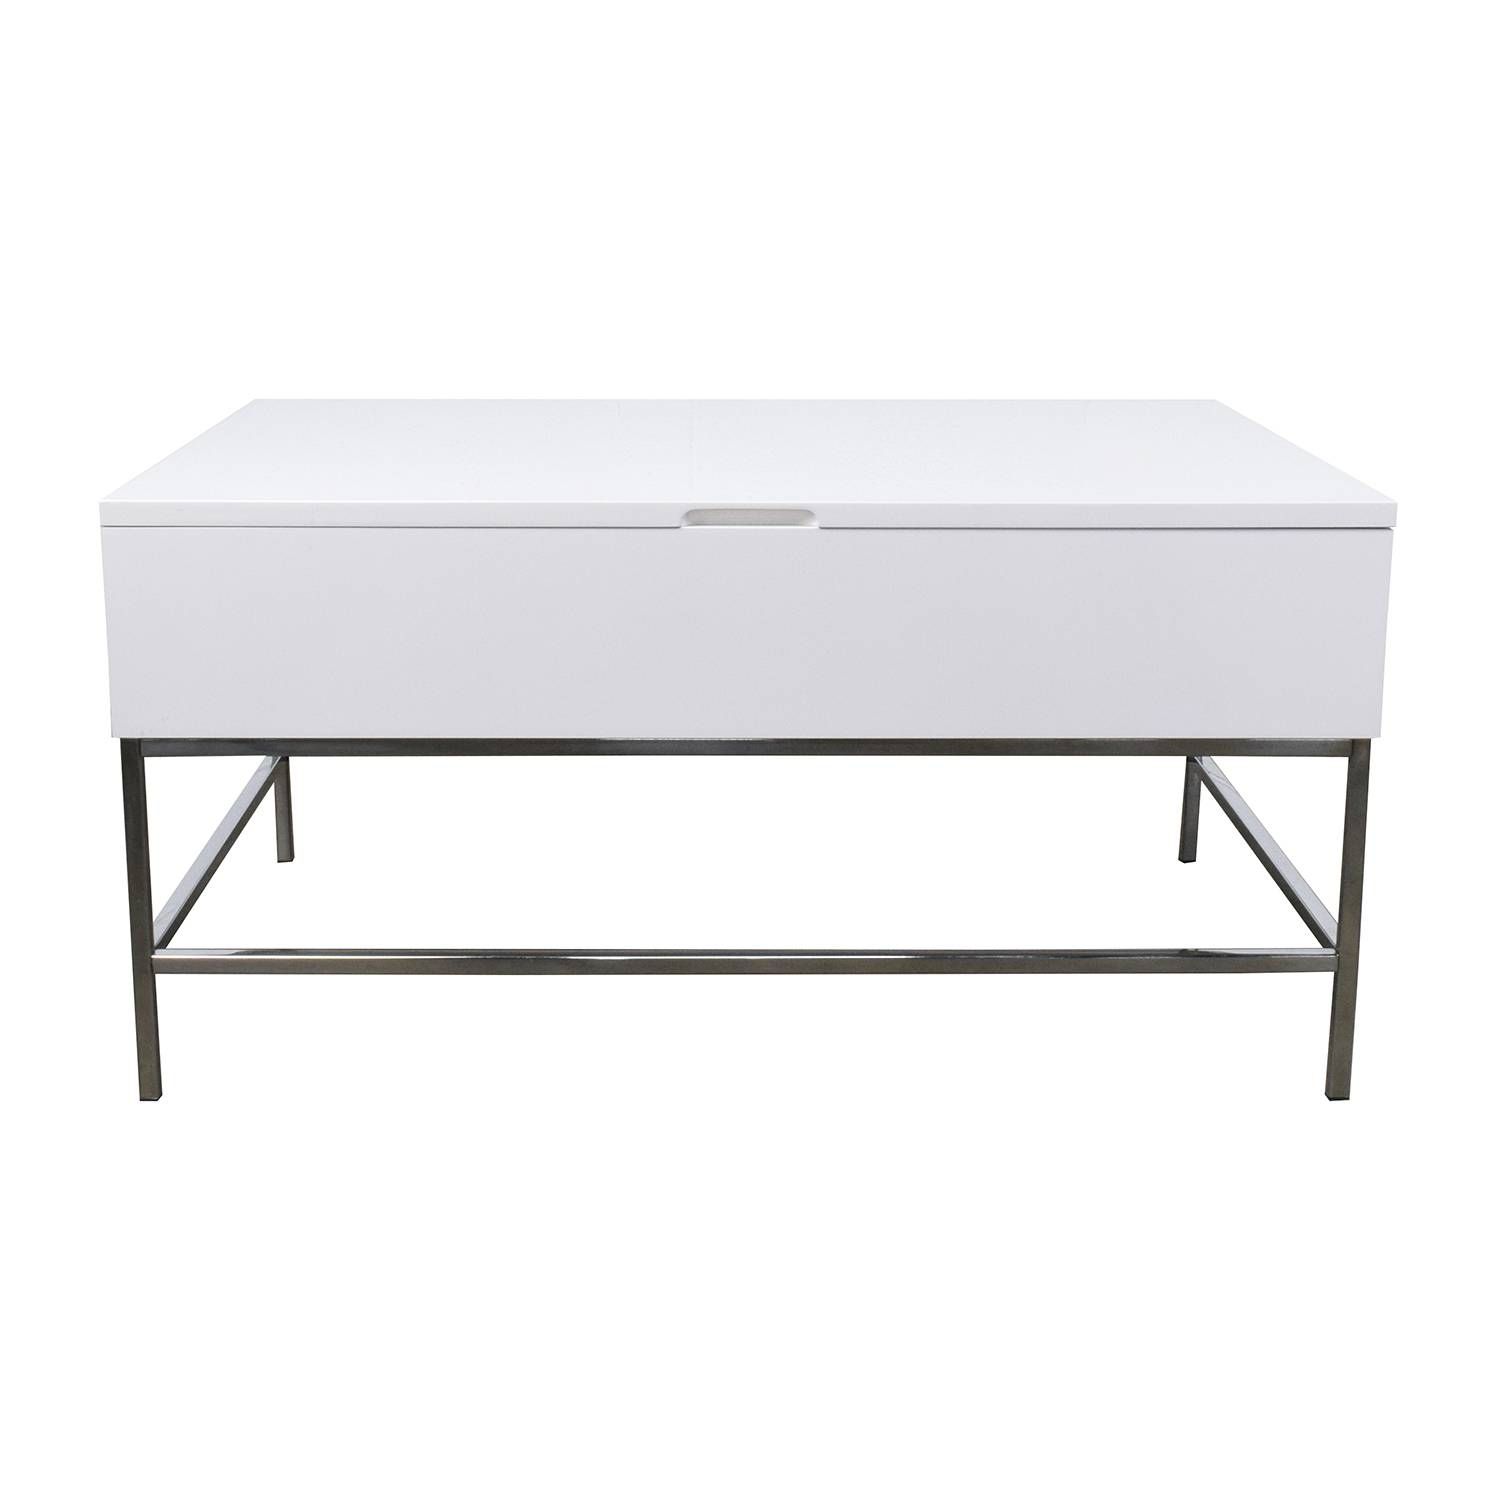 34% Off – West Elm Storage Table West Elm White Lacquer Wood In Lacquer Coffee Tables (View 29 of 30)